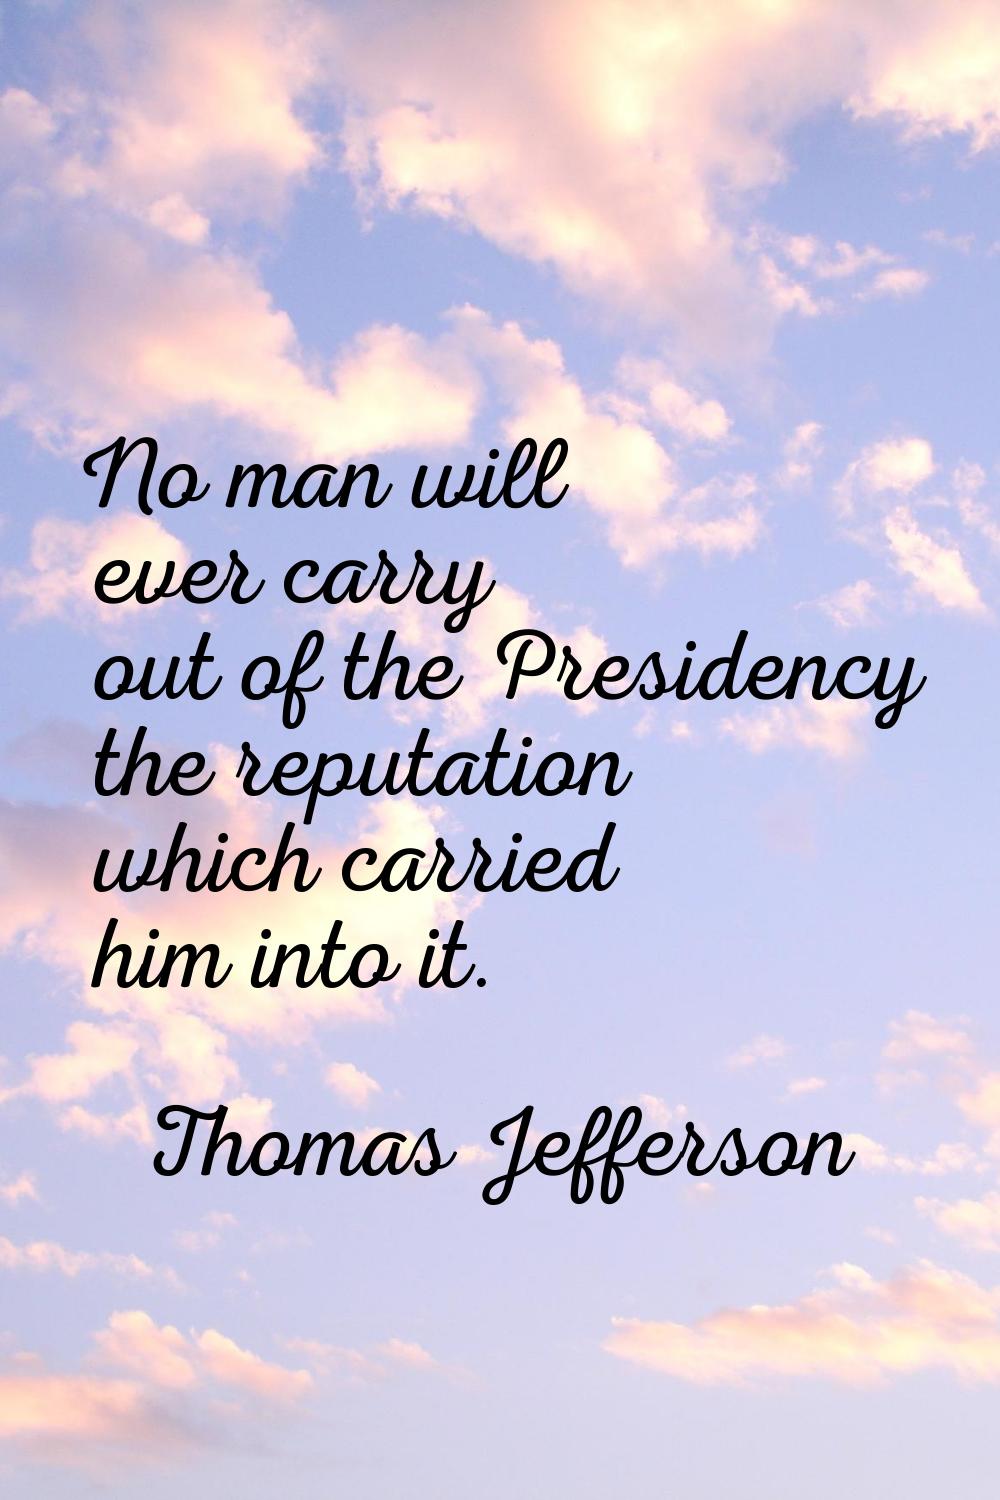 No man will ever carry out of the Presidency the reputation which carried him into it.